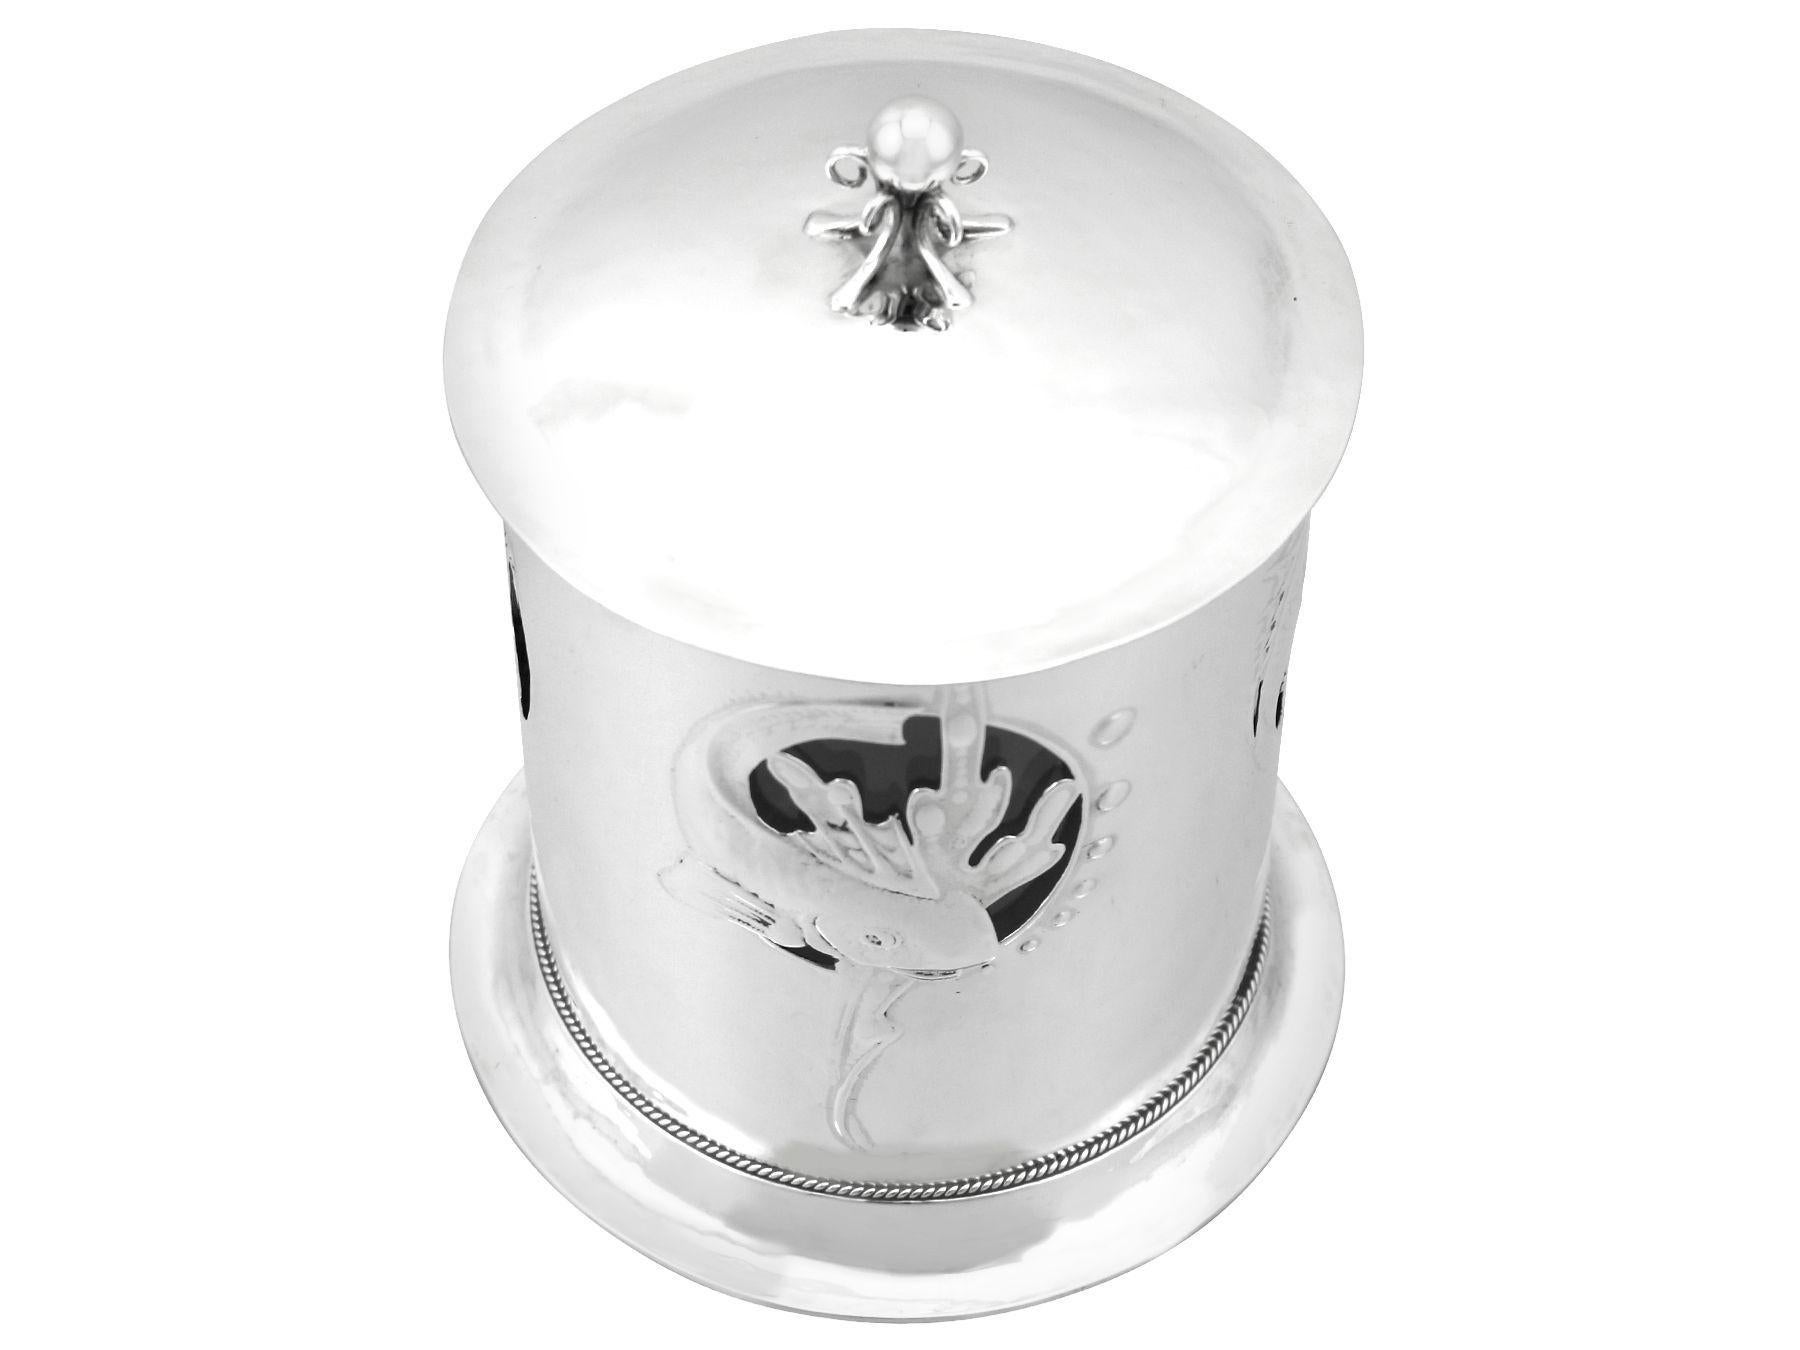 An exceptional, fine and impressive antique English sterling silver and glass biscuit box in the Arts and Crafts style; an addition to our diverse silver box collection.

This exceptional antique Edwardian sterling silver and glass biscuit box has